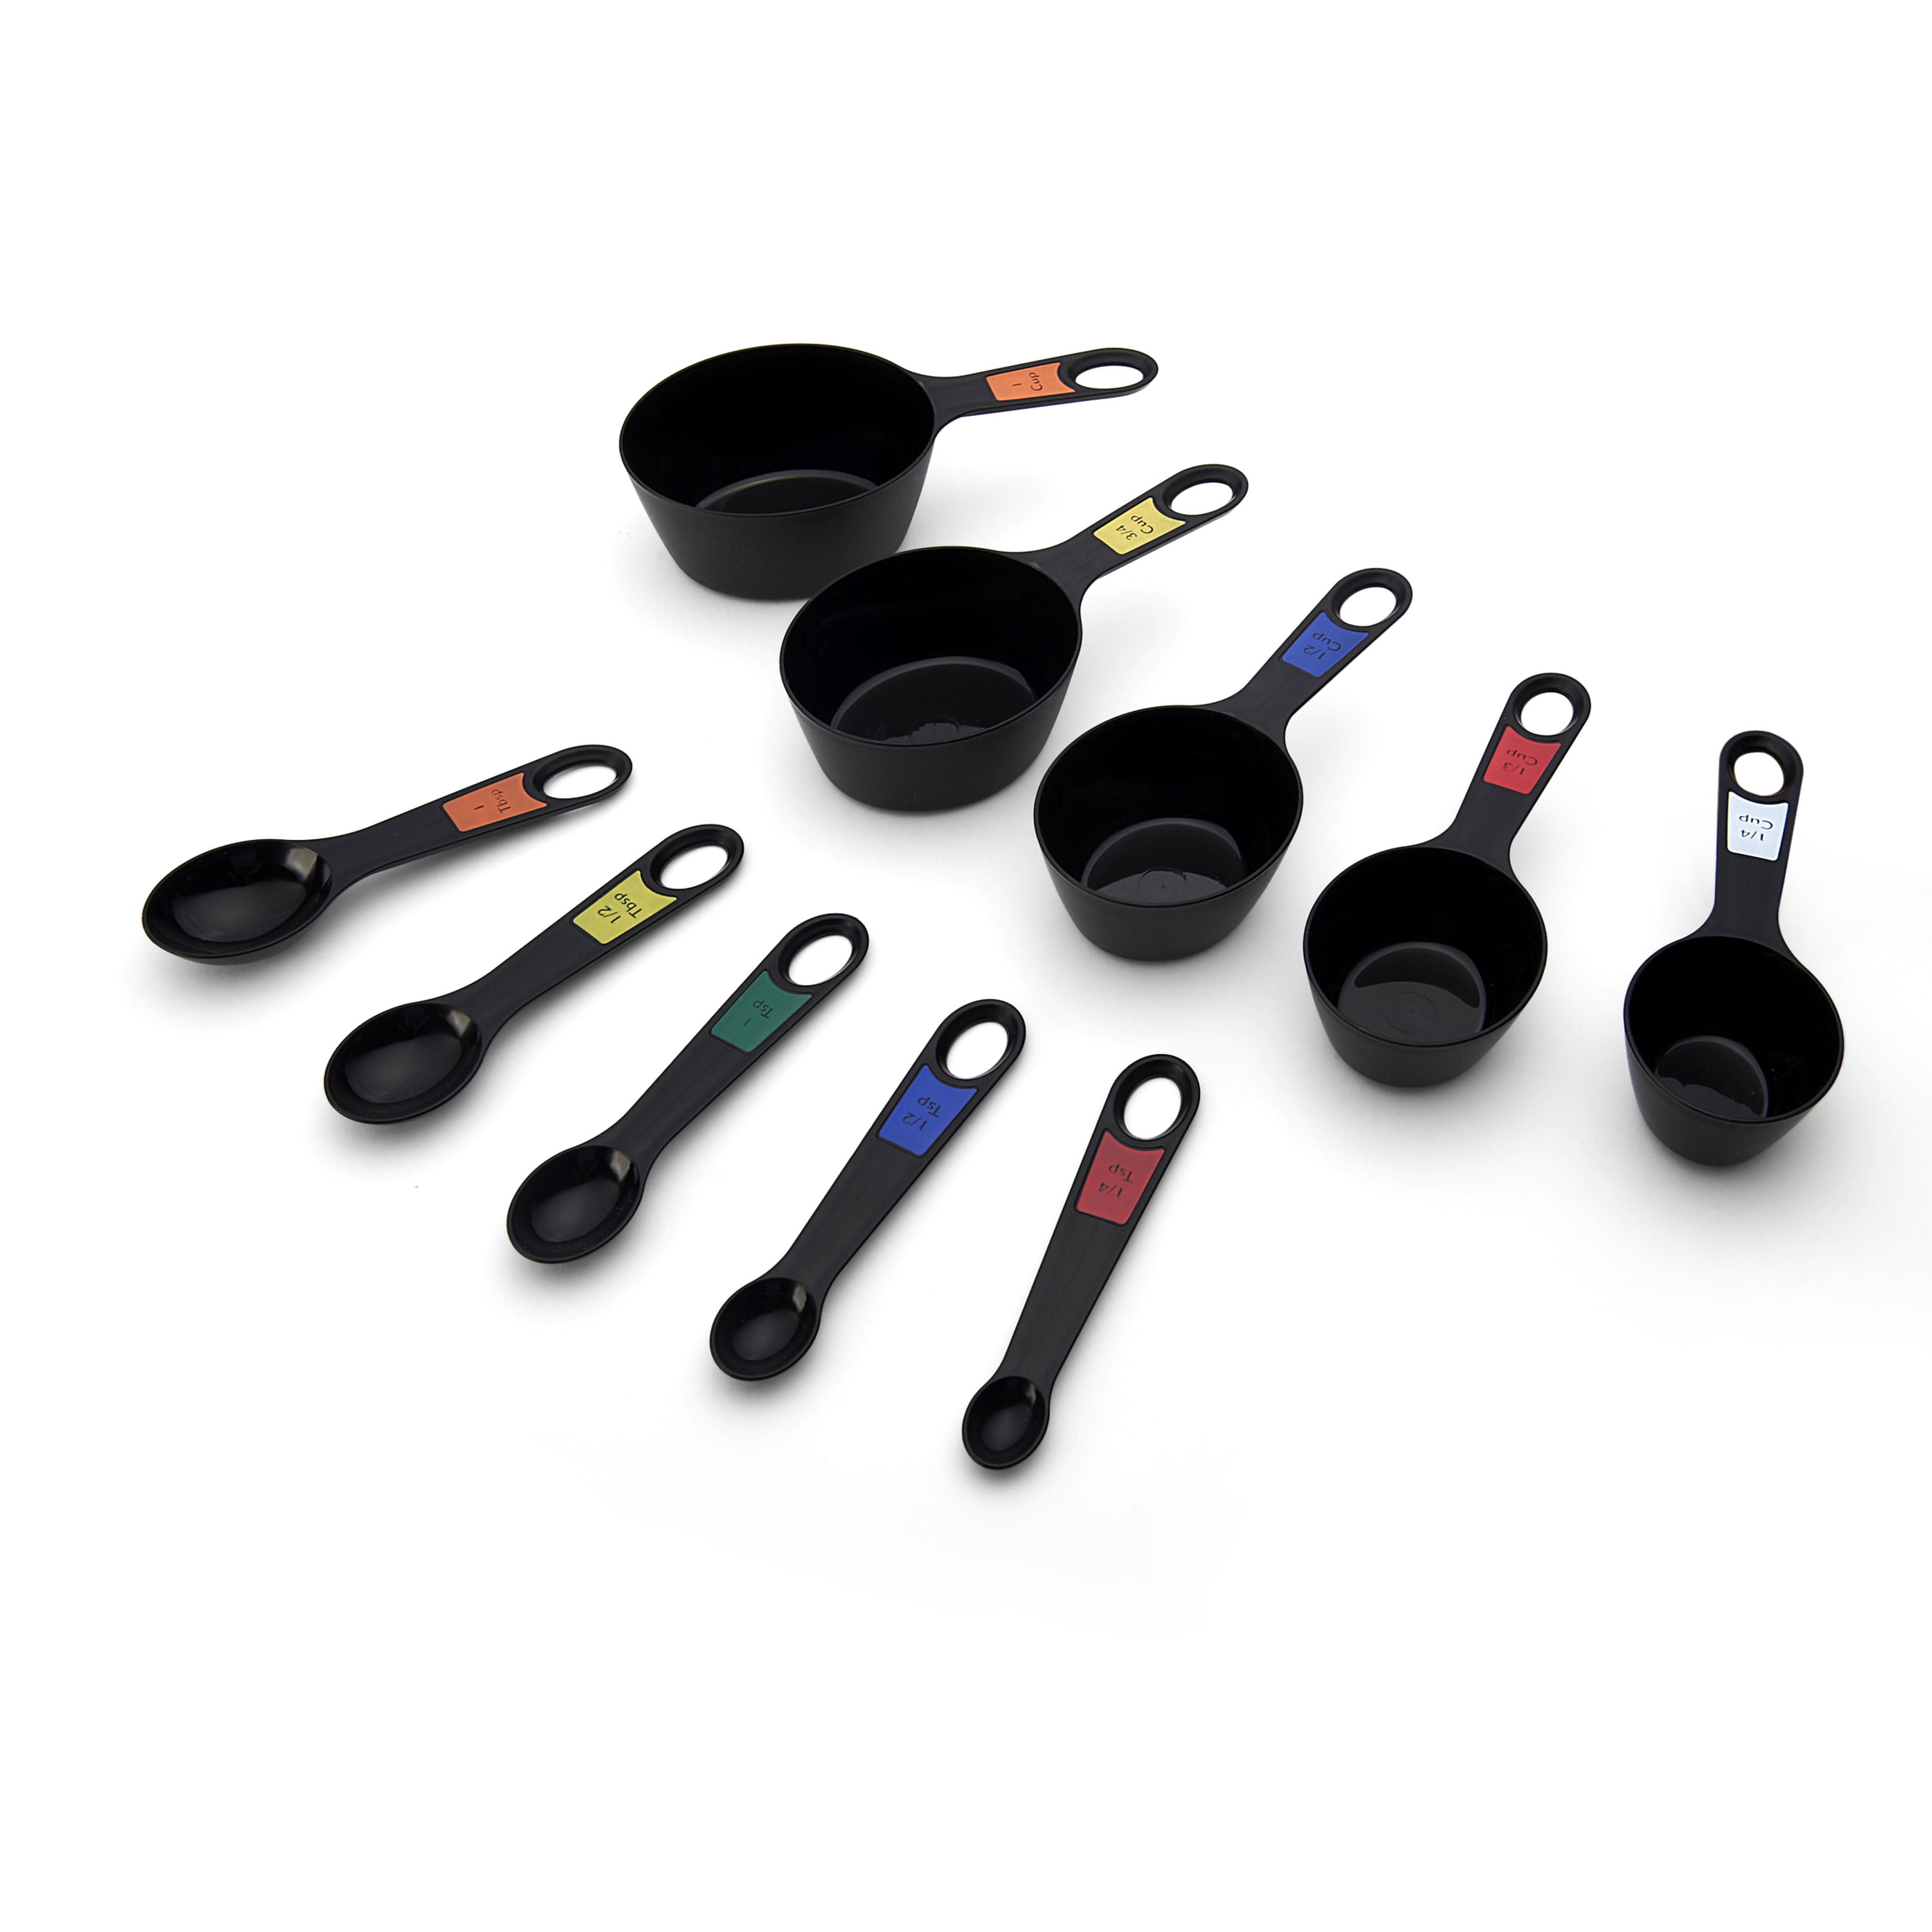 Farberware 12-Piece Measuring Cup and Spoon Set 5152949 - The Home Depot